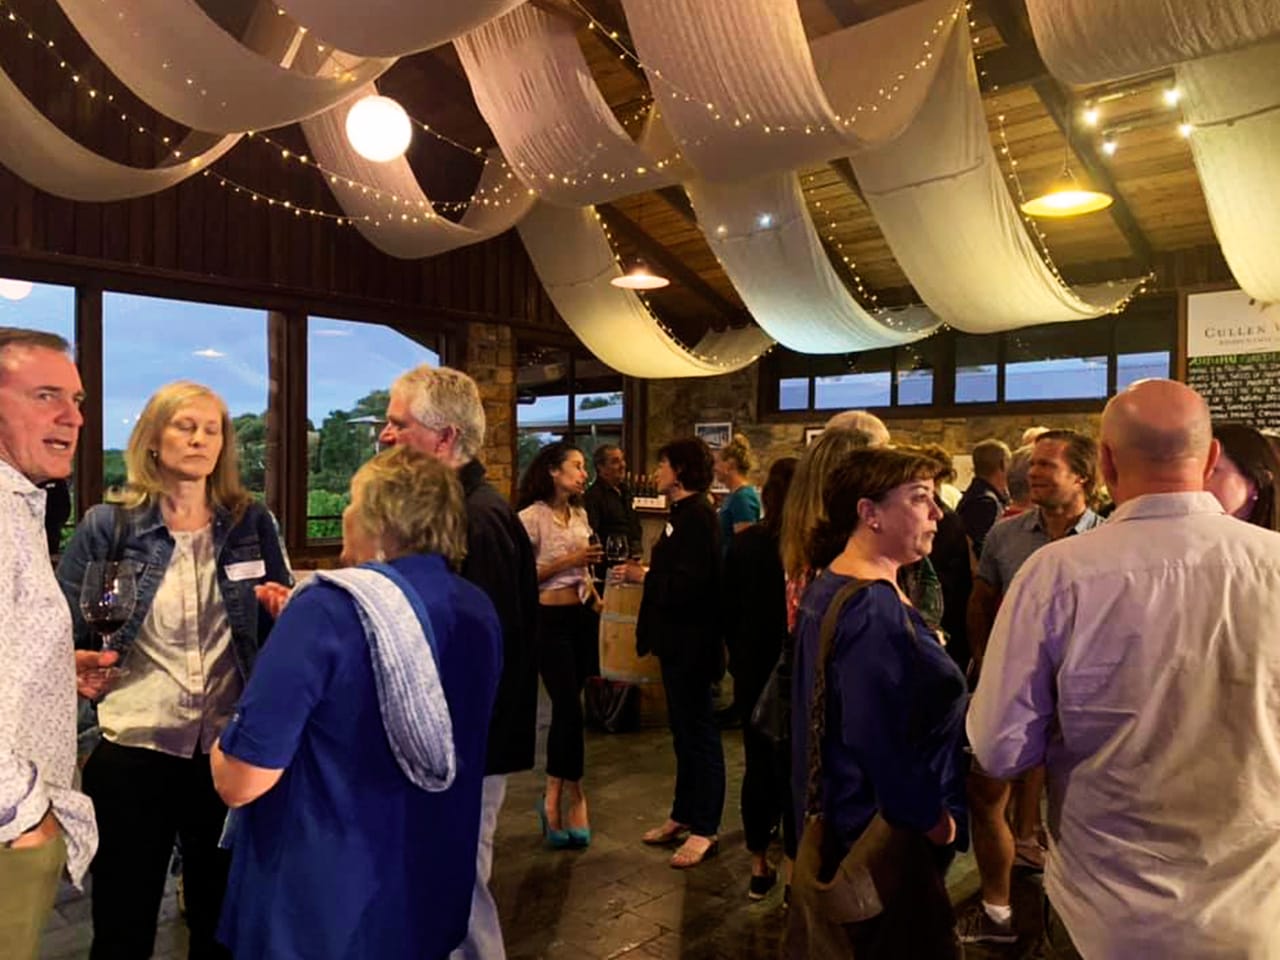 Guests Enjoying Their Drinks In An Event With Ceiling Draping Inside The Function Room